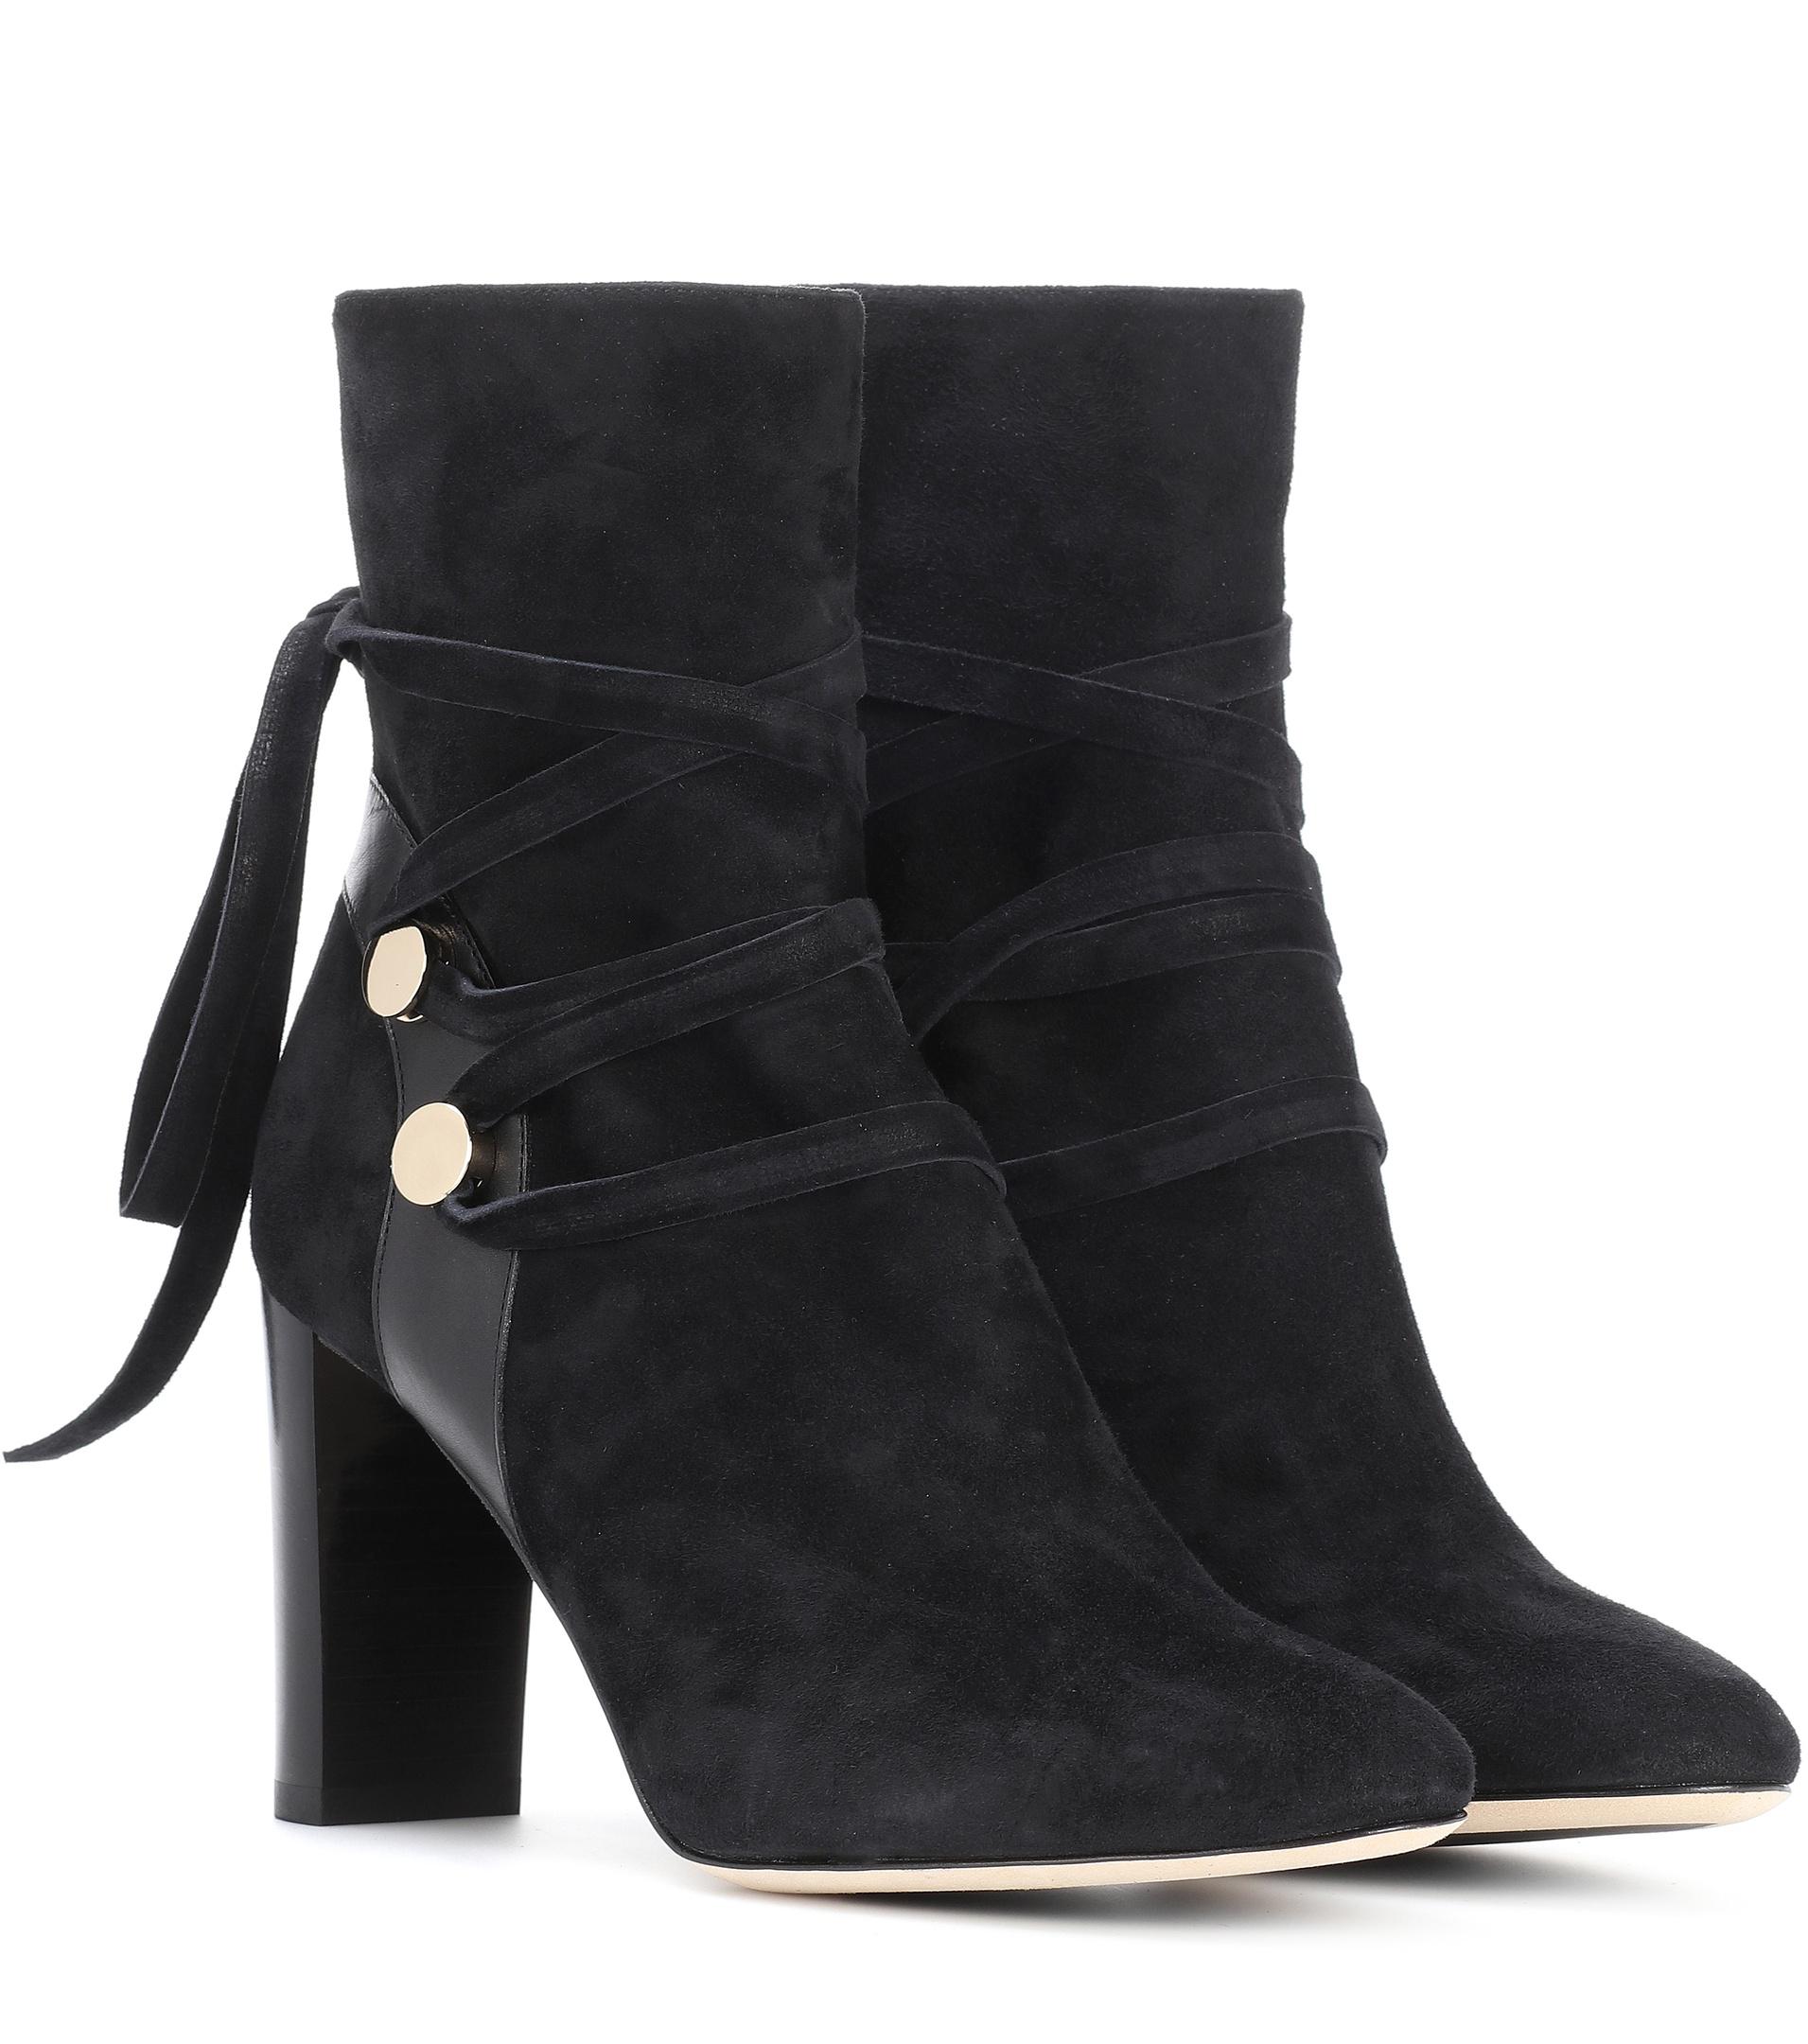 Lyst - Jimmy Choo Houston 85 Suede Ankle Boots in Black